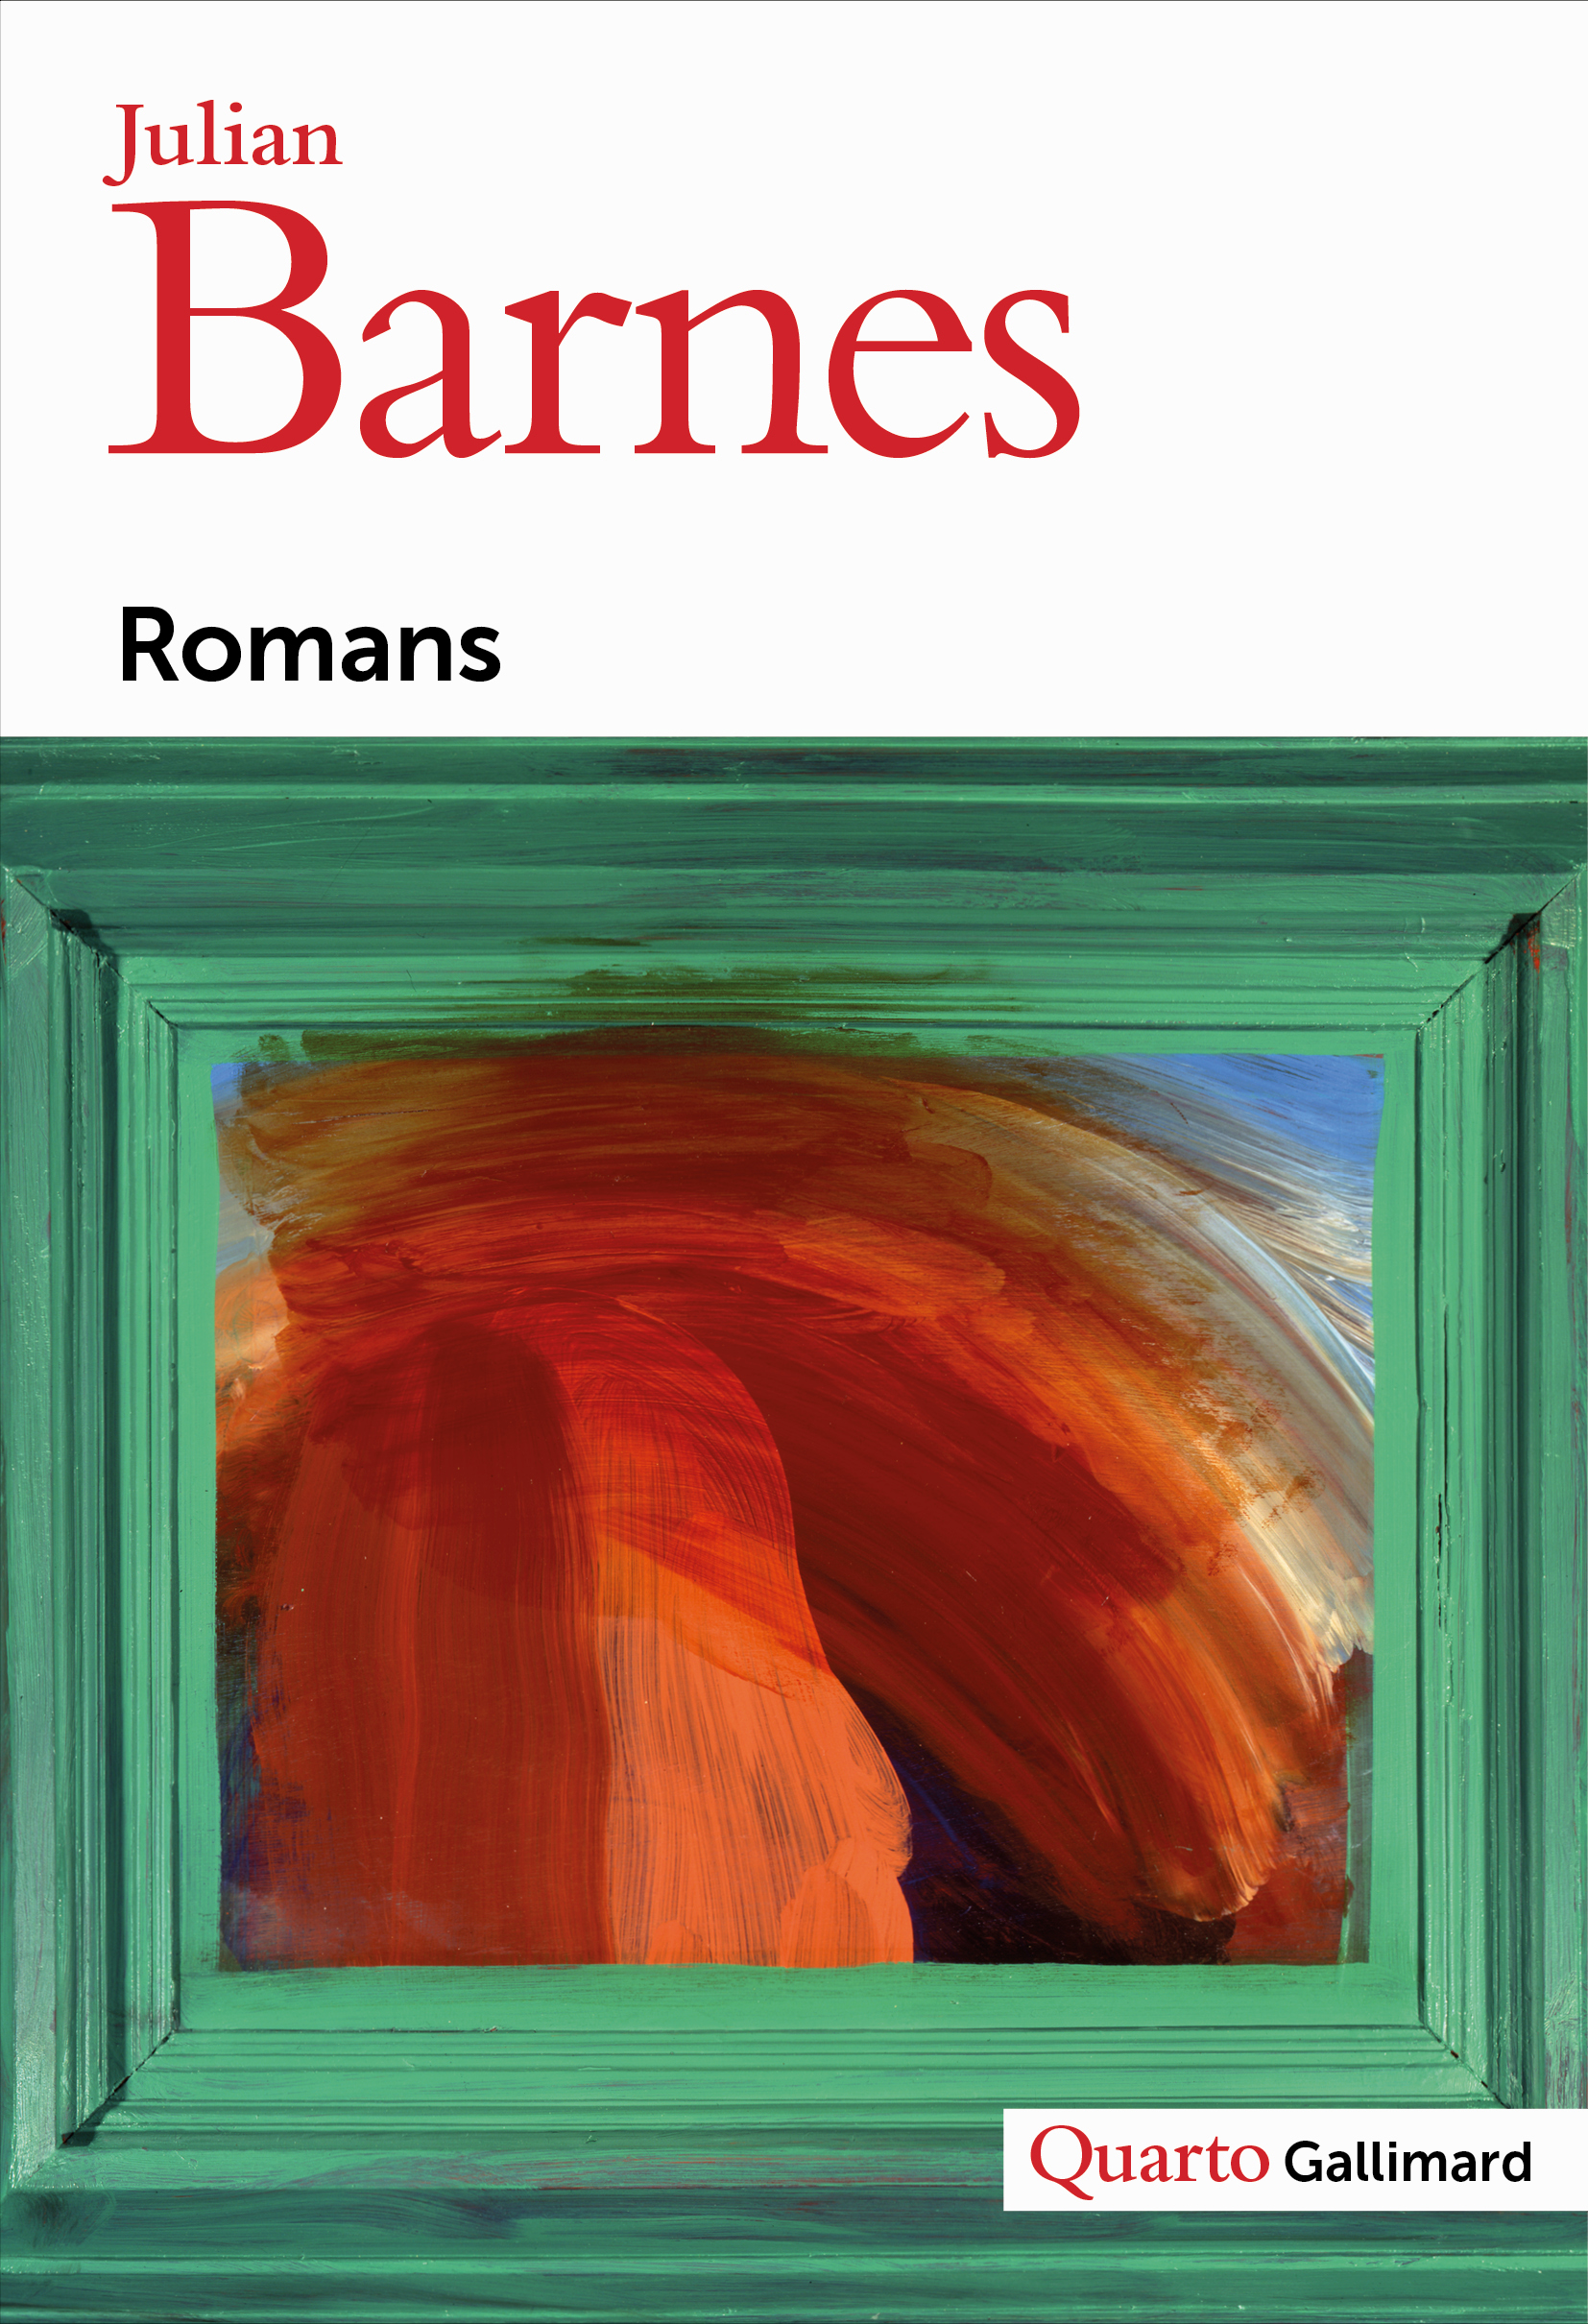 Romans by Julian Barnes; Published by Gallimard; Edited by Vanessa Guignery